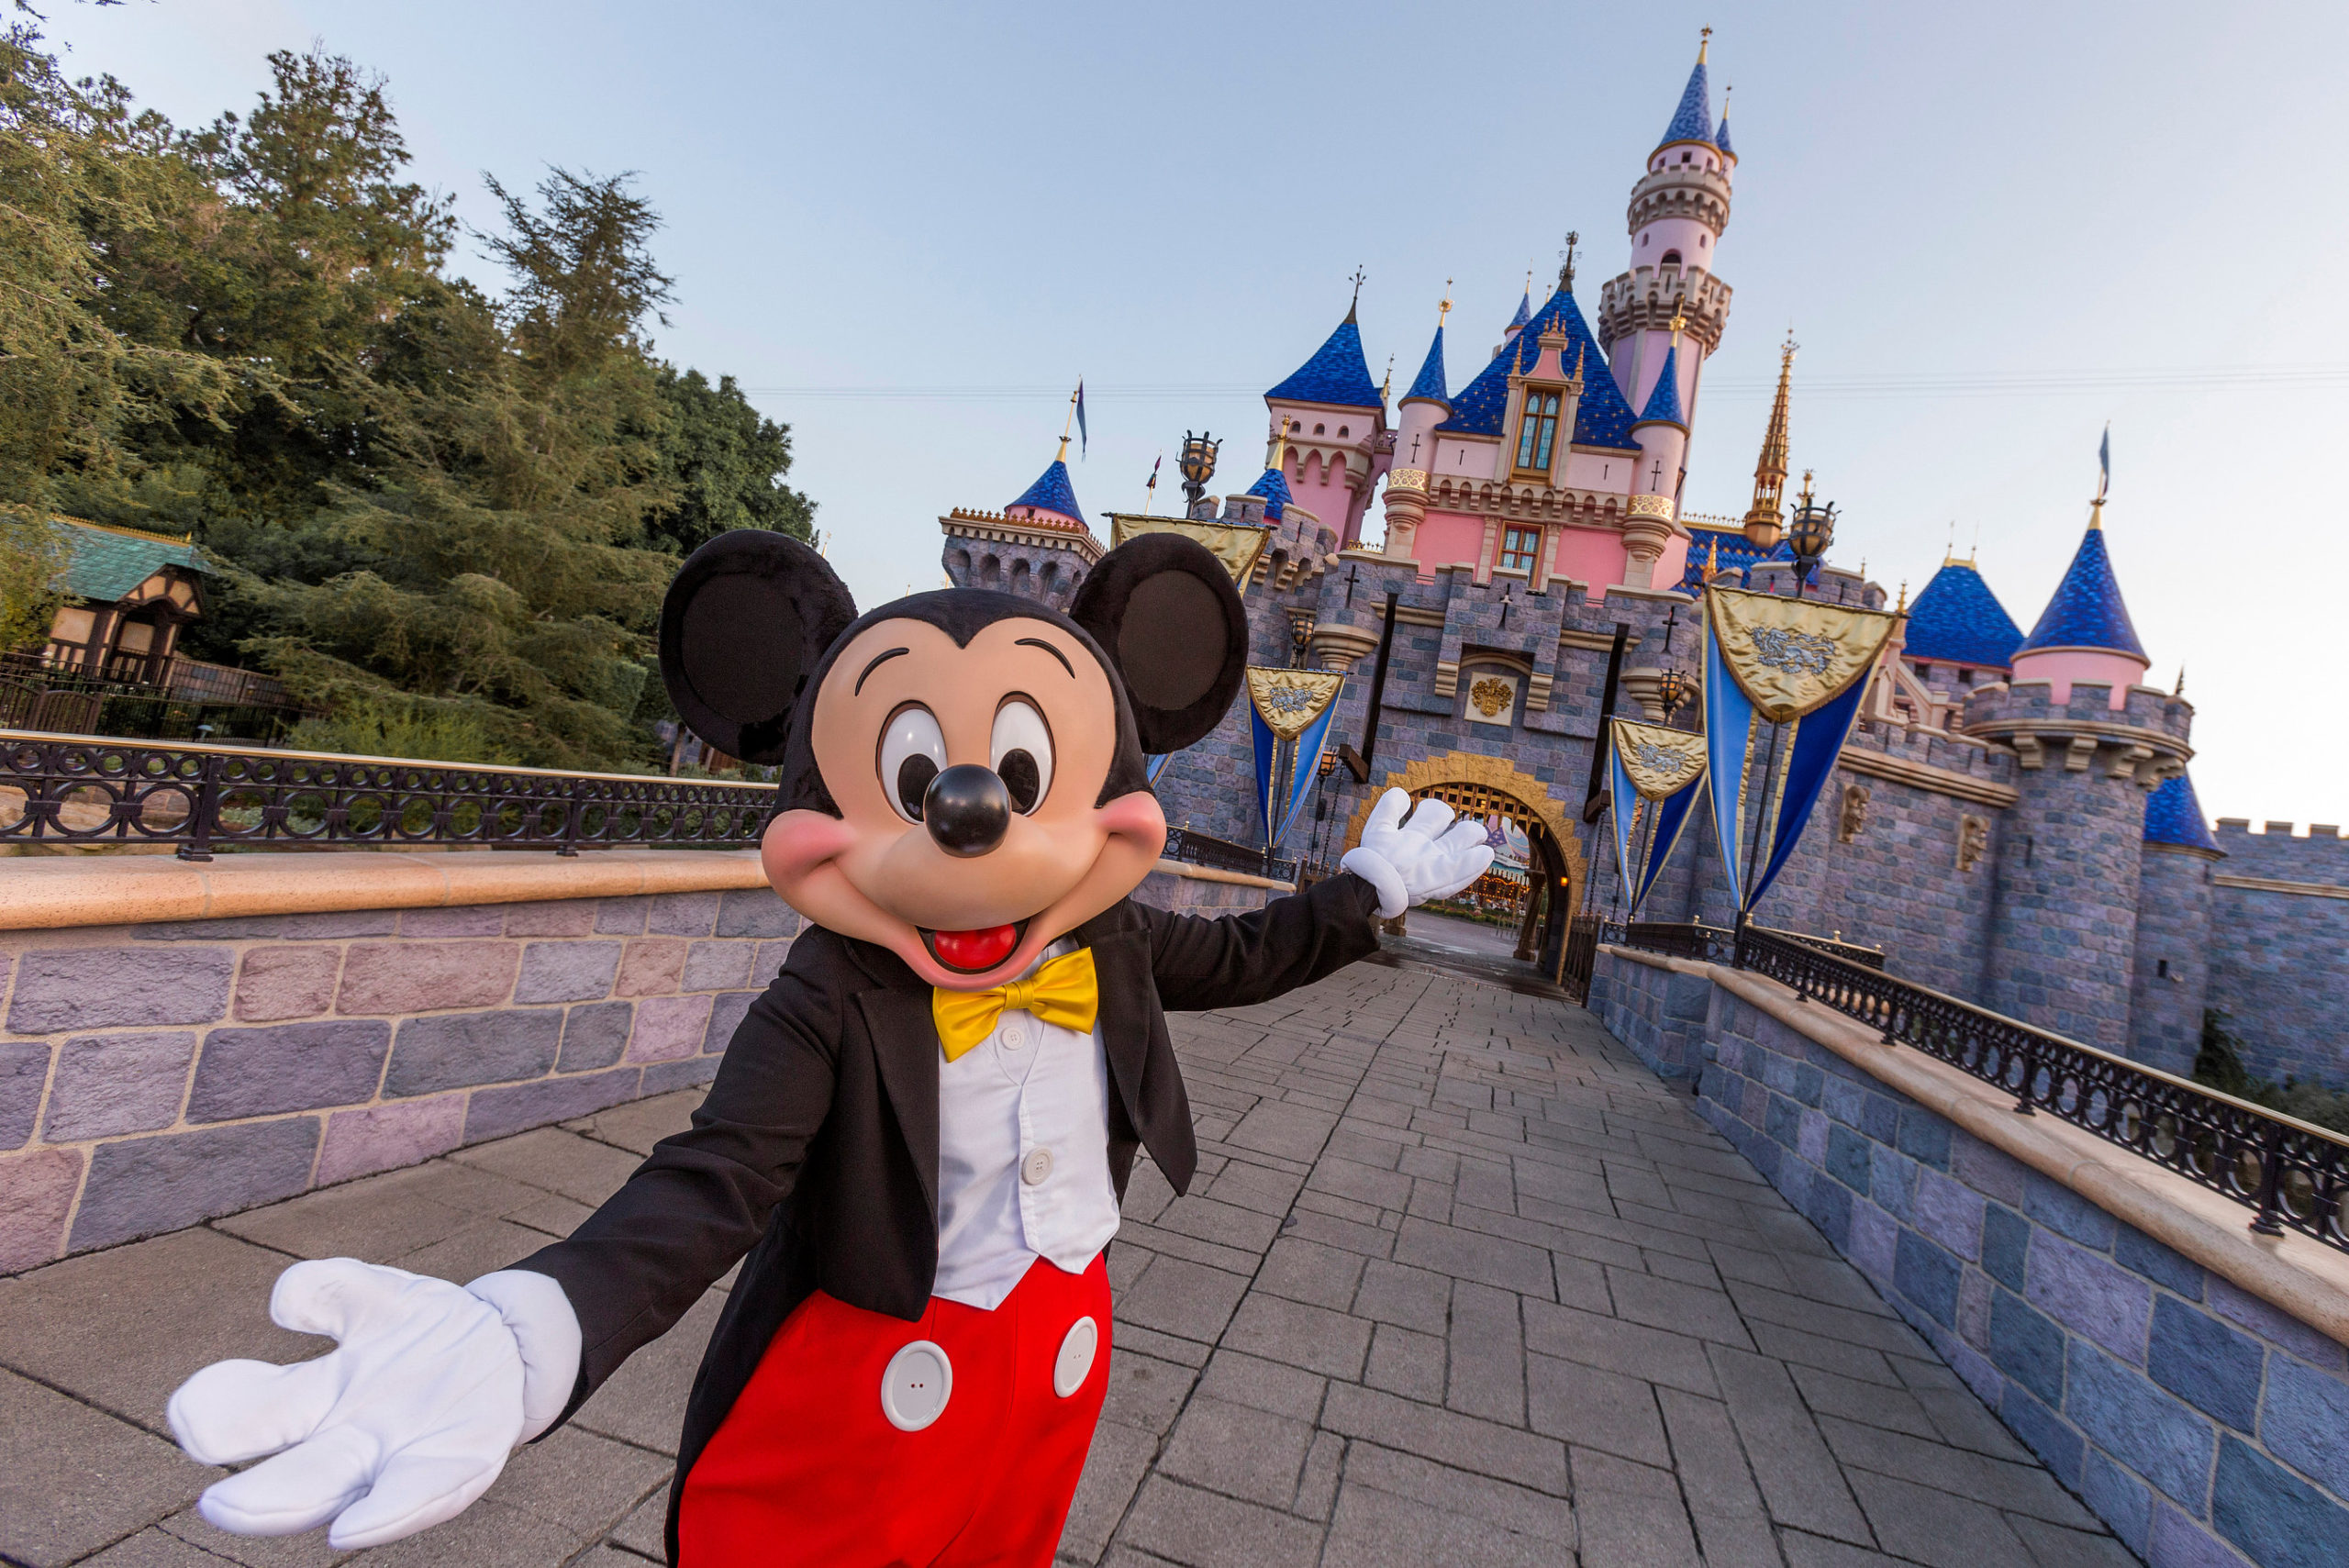 Disneyland To Open April 30th: Here’s What We Know